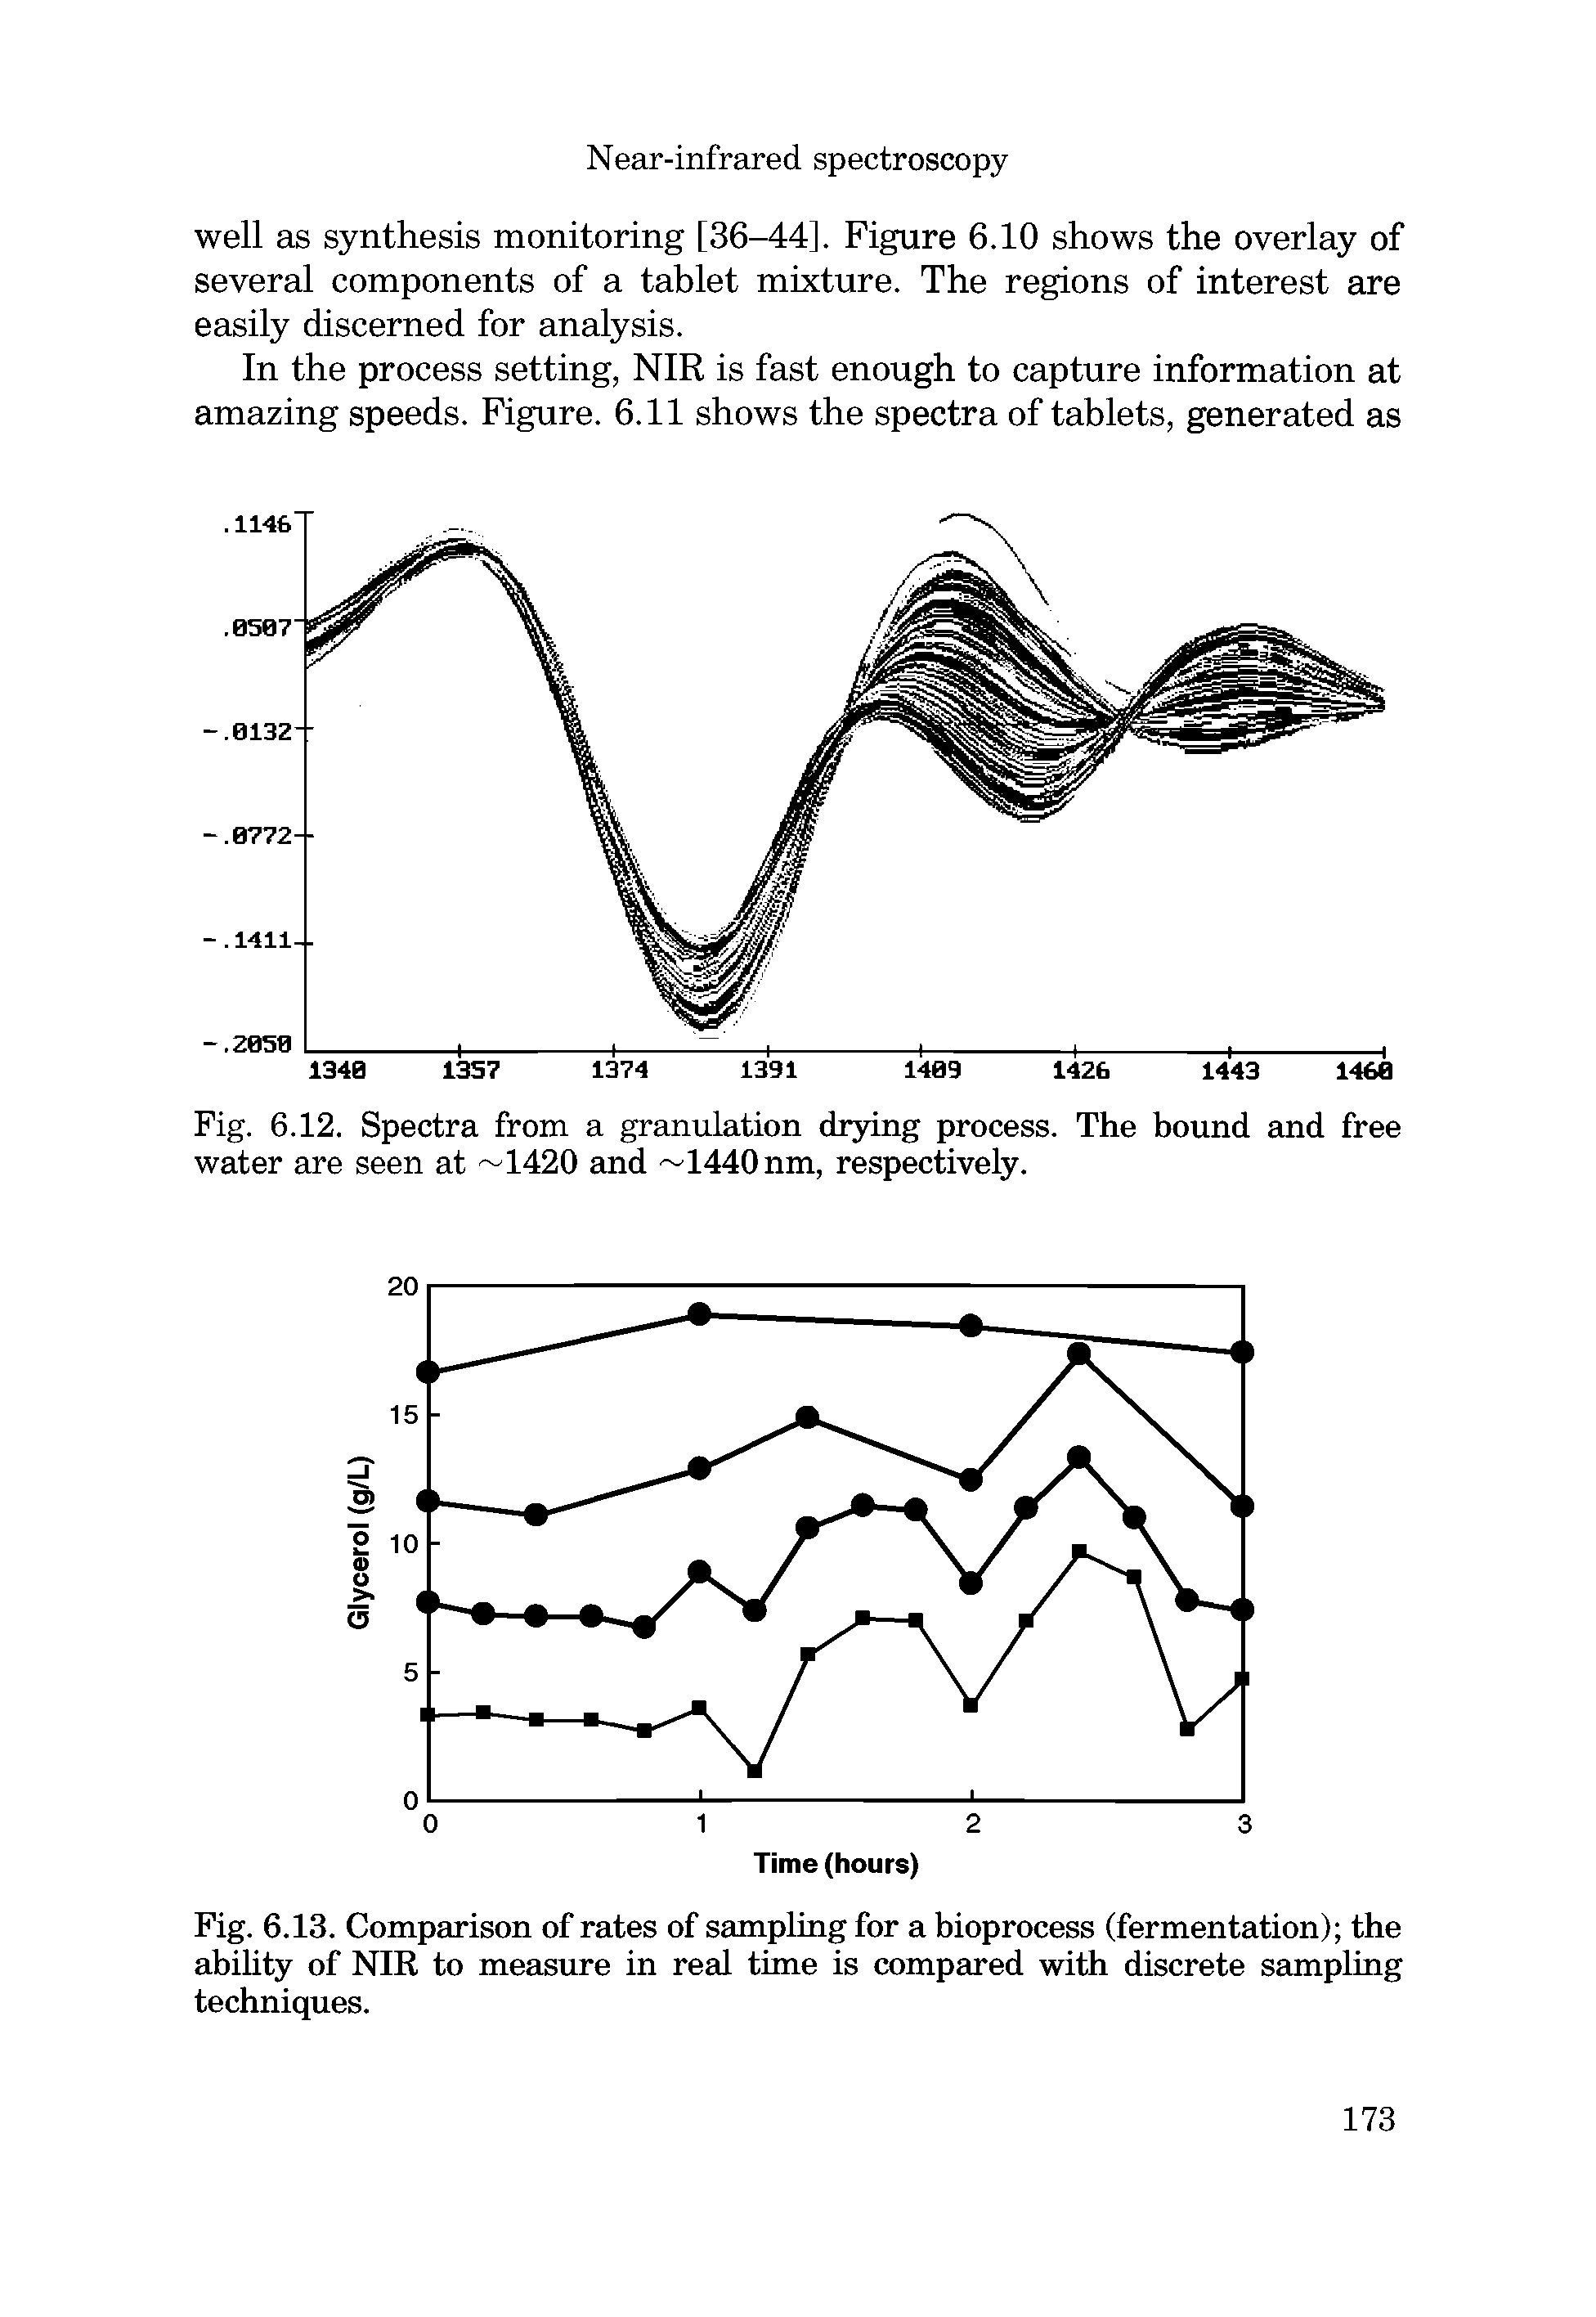 Fig. 6.13. Comparison of rates of sampling for a bioprocess (fermentation) the ability of NIR to measure in real time is compared with discrete sampling techniques.